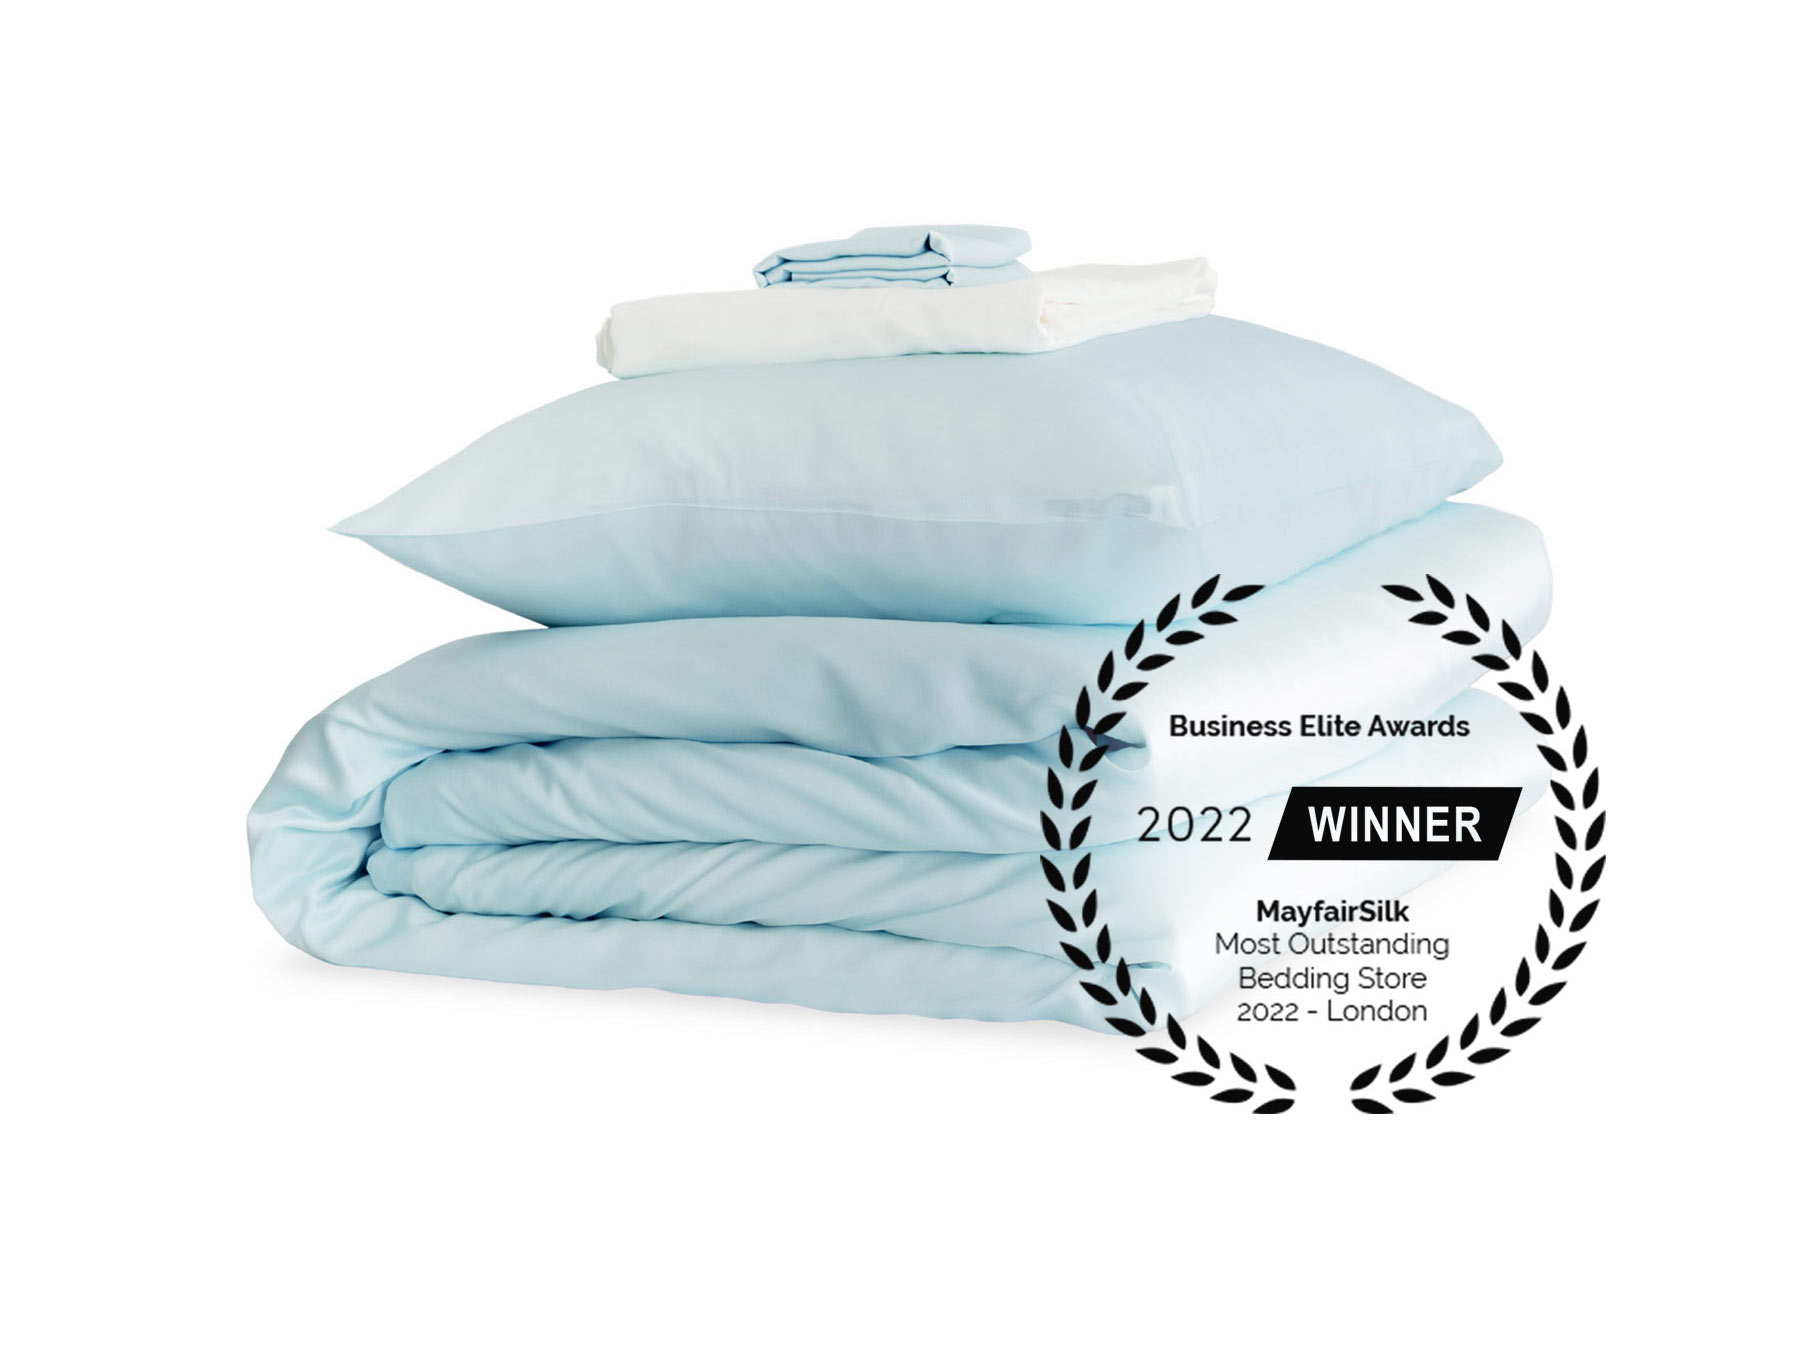 Luxury Artisan-Crafted Silk Bedding Store From London, UK Named Best In Market